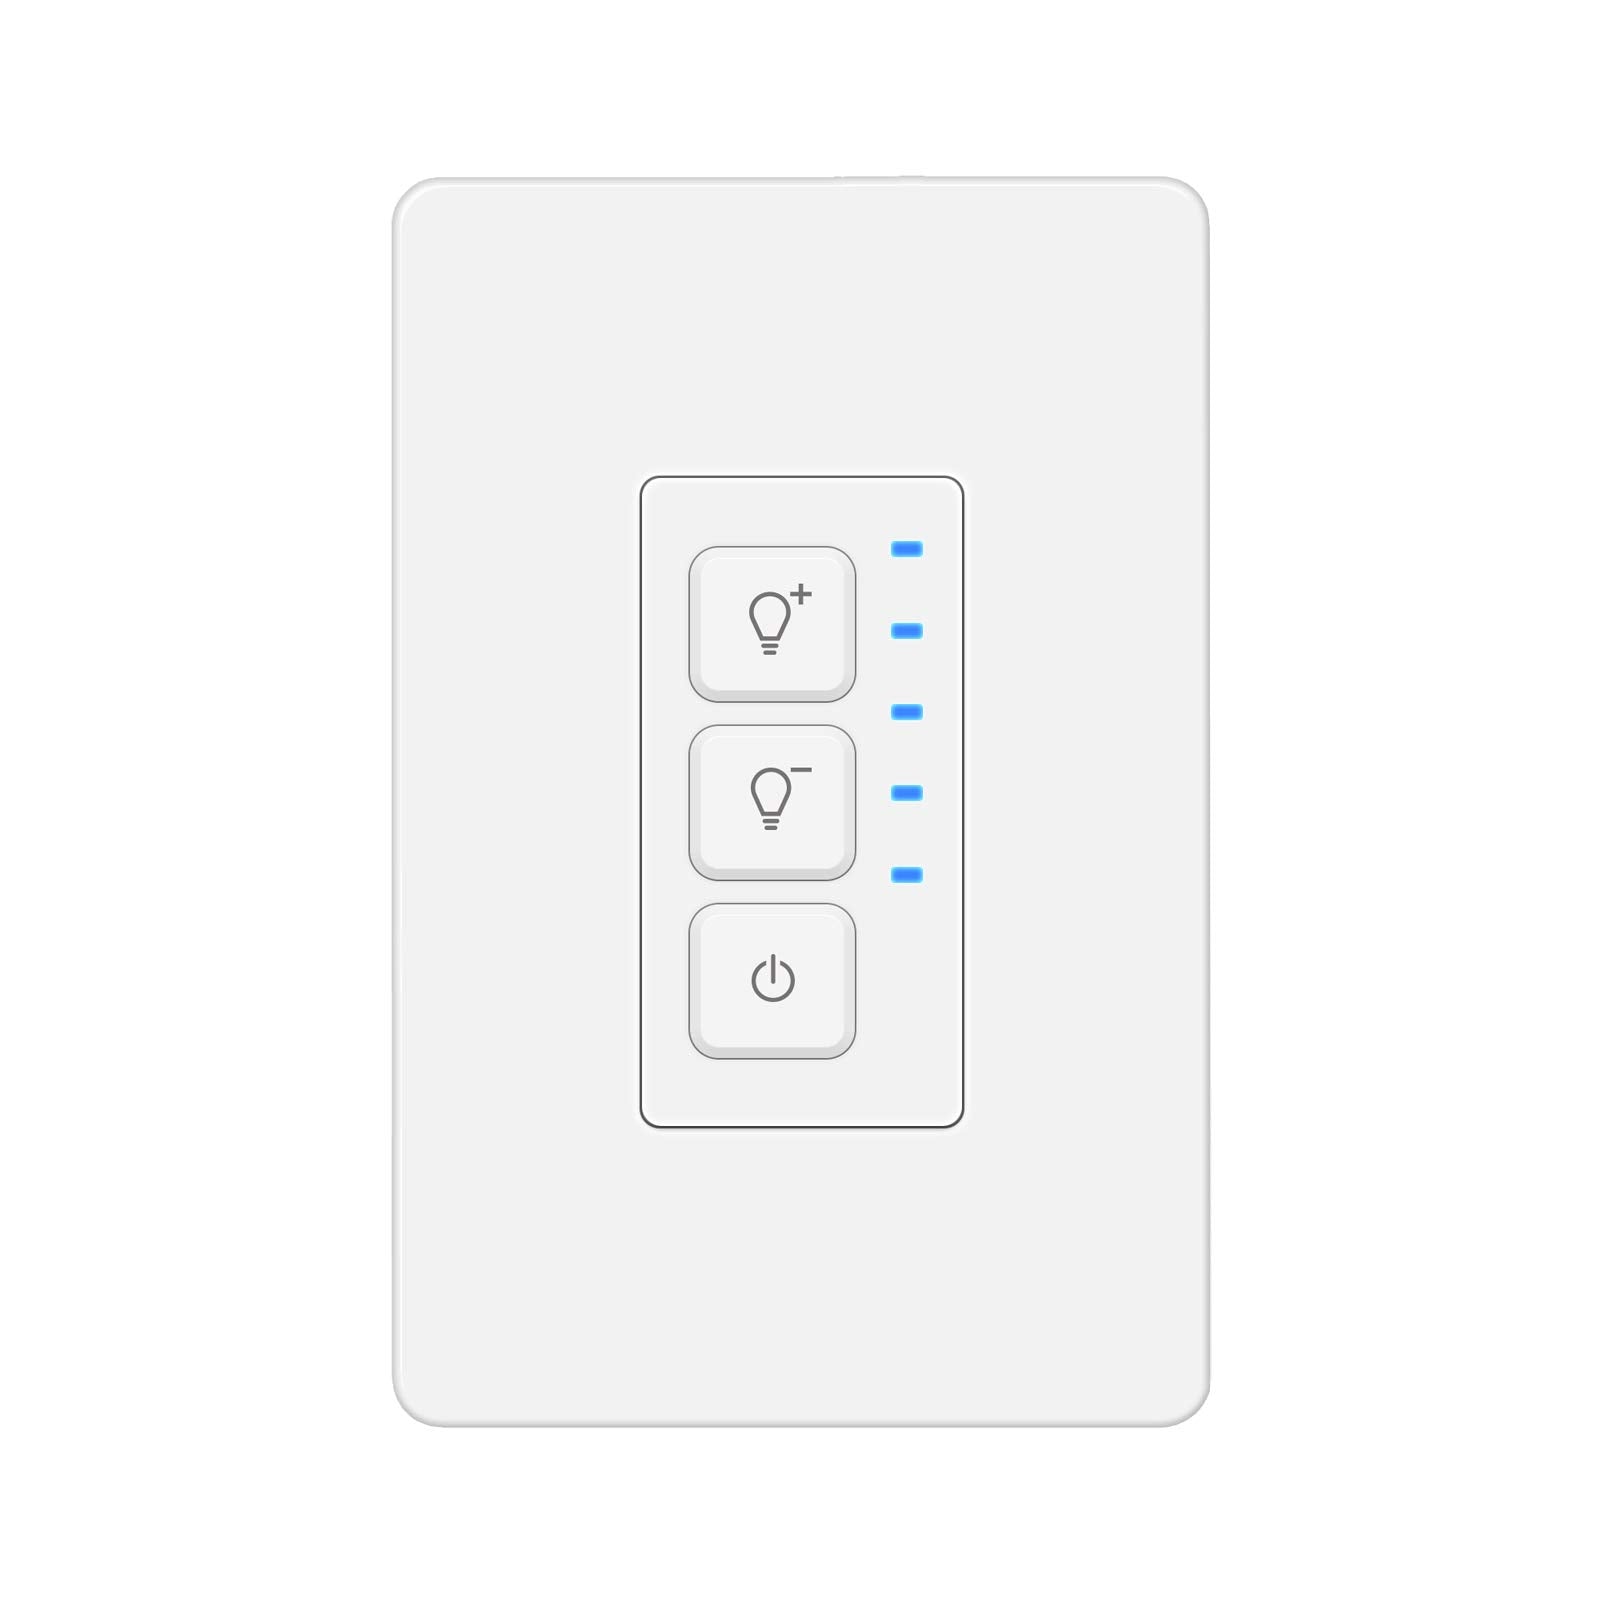 Smart Dimmer Switch for Dimmable LED Lights BN-LINK